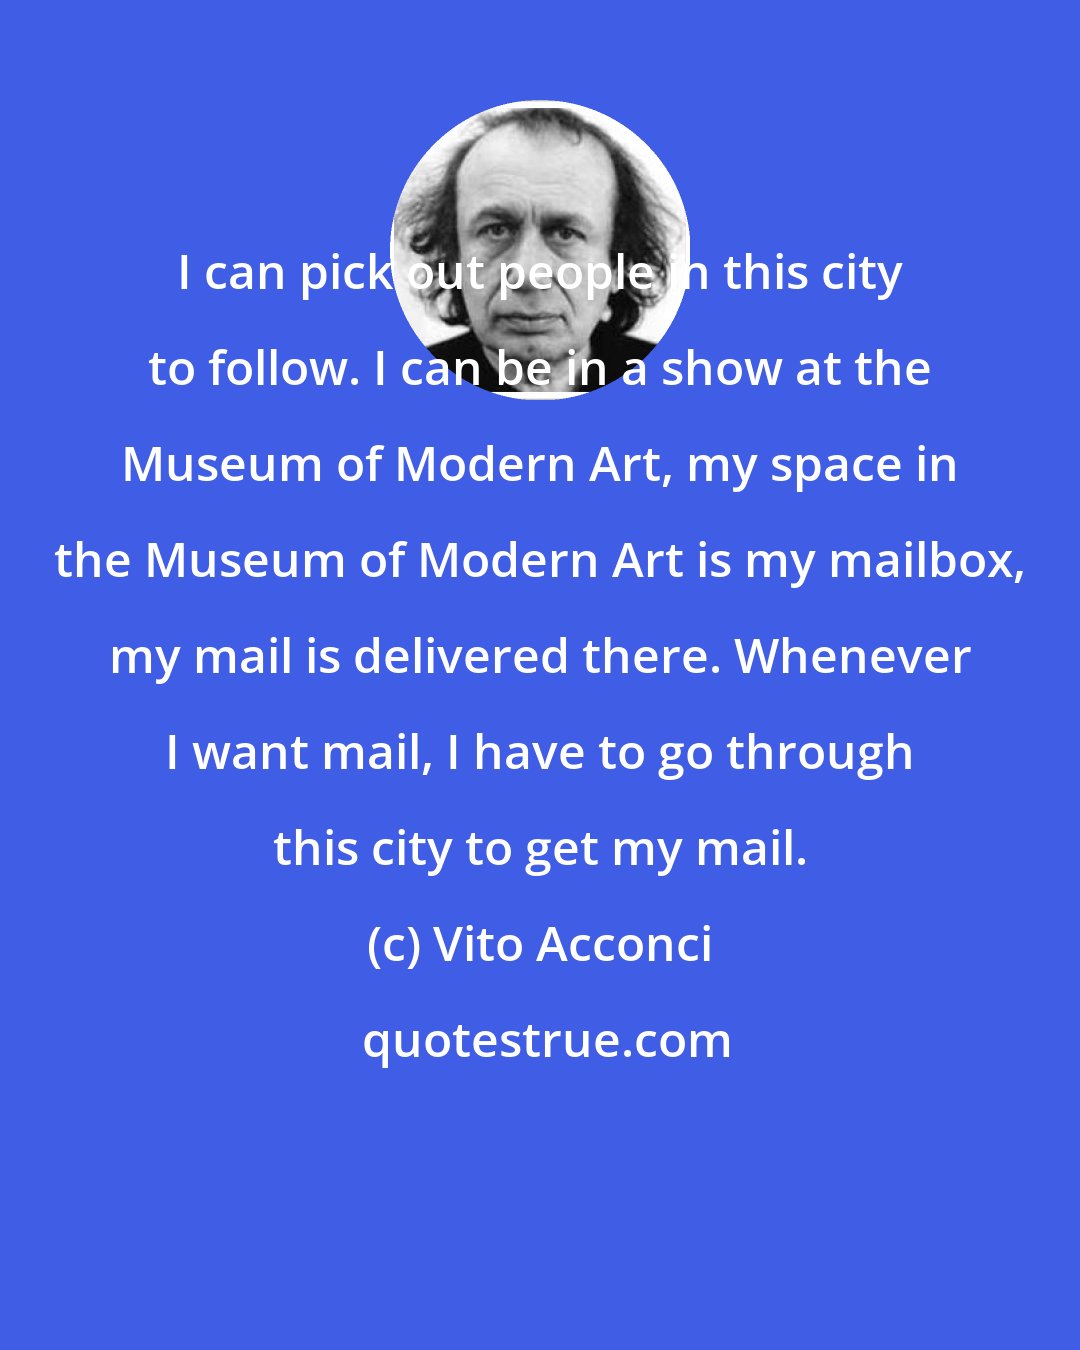 Vito Acconci: I can pick out people in this city to follow. I can be in a show at the Museum of Modern Art, my space in the Museum of Modern Art is my mailbox, my mail is delivered there. Whenever I want mail, I have to go through this city to get my mail.